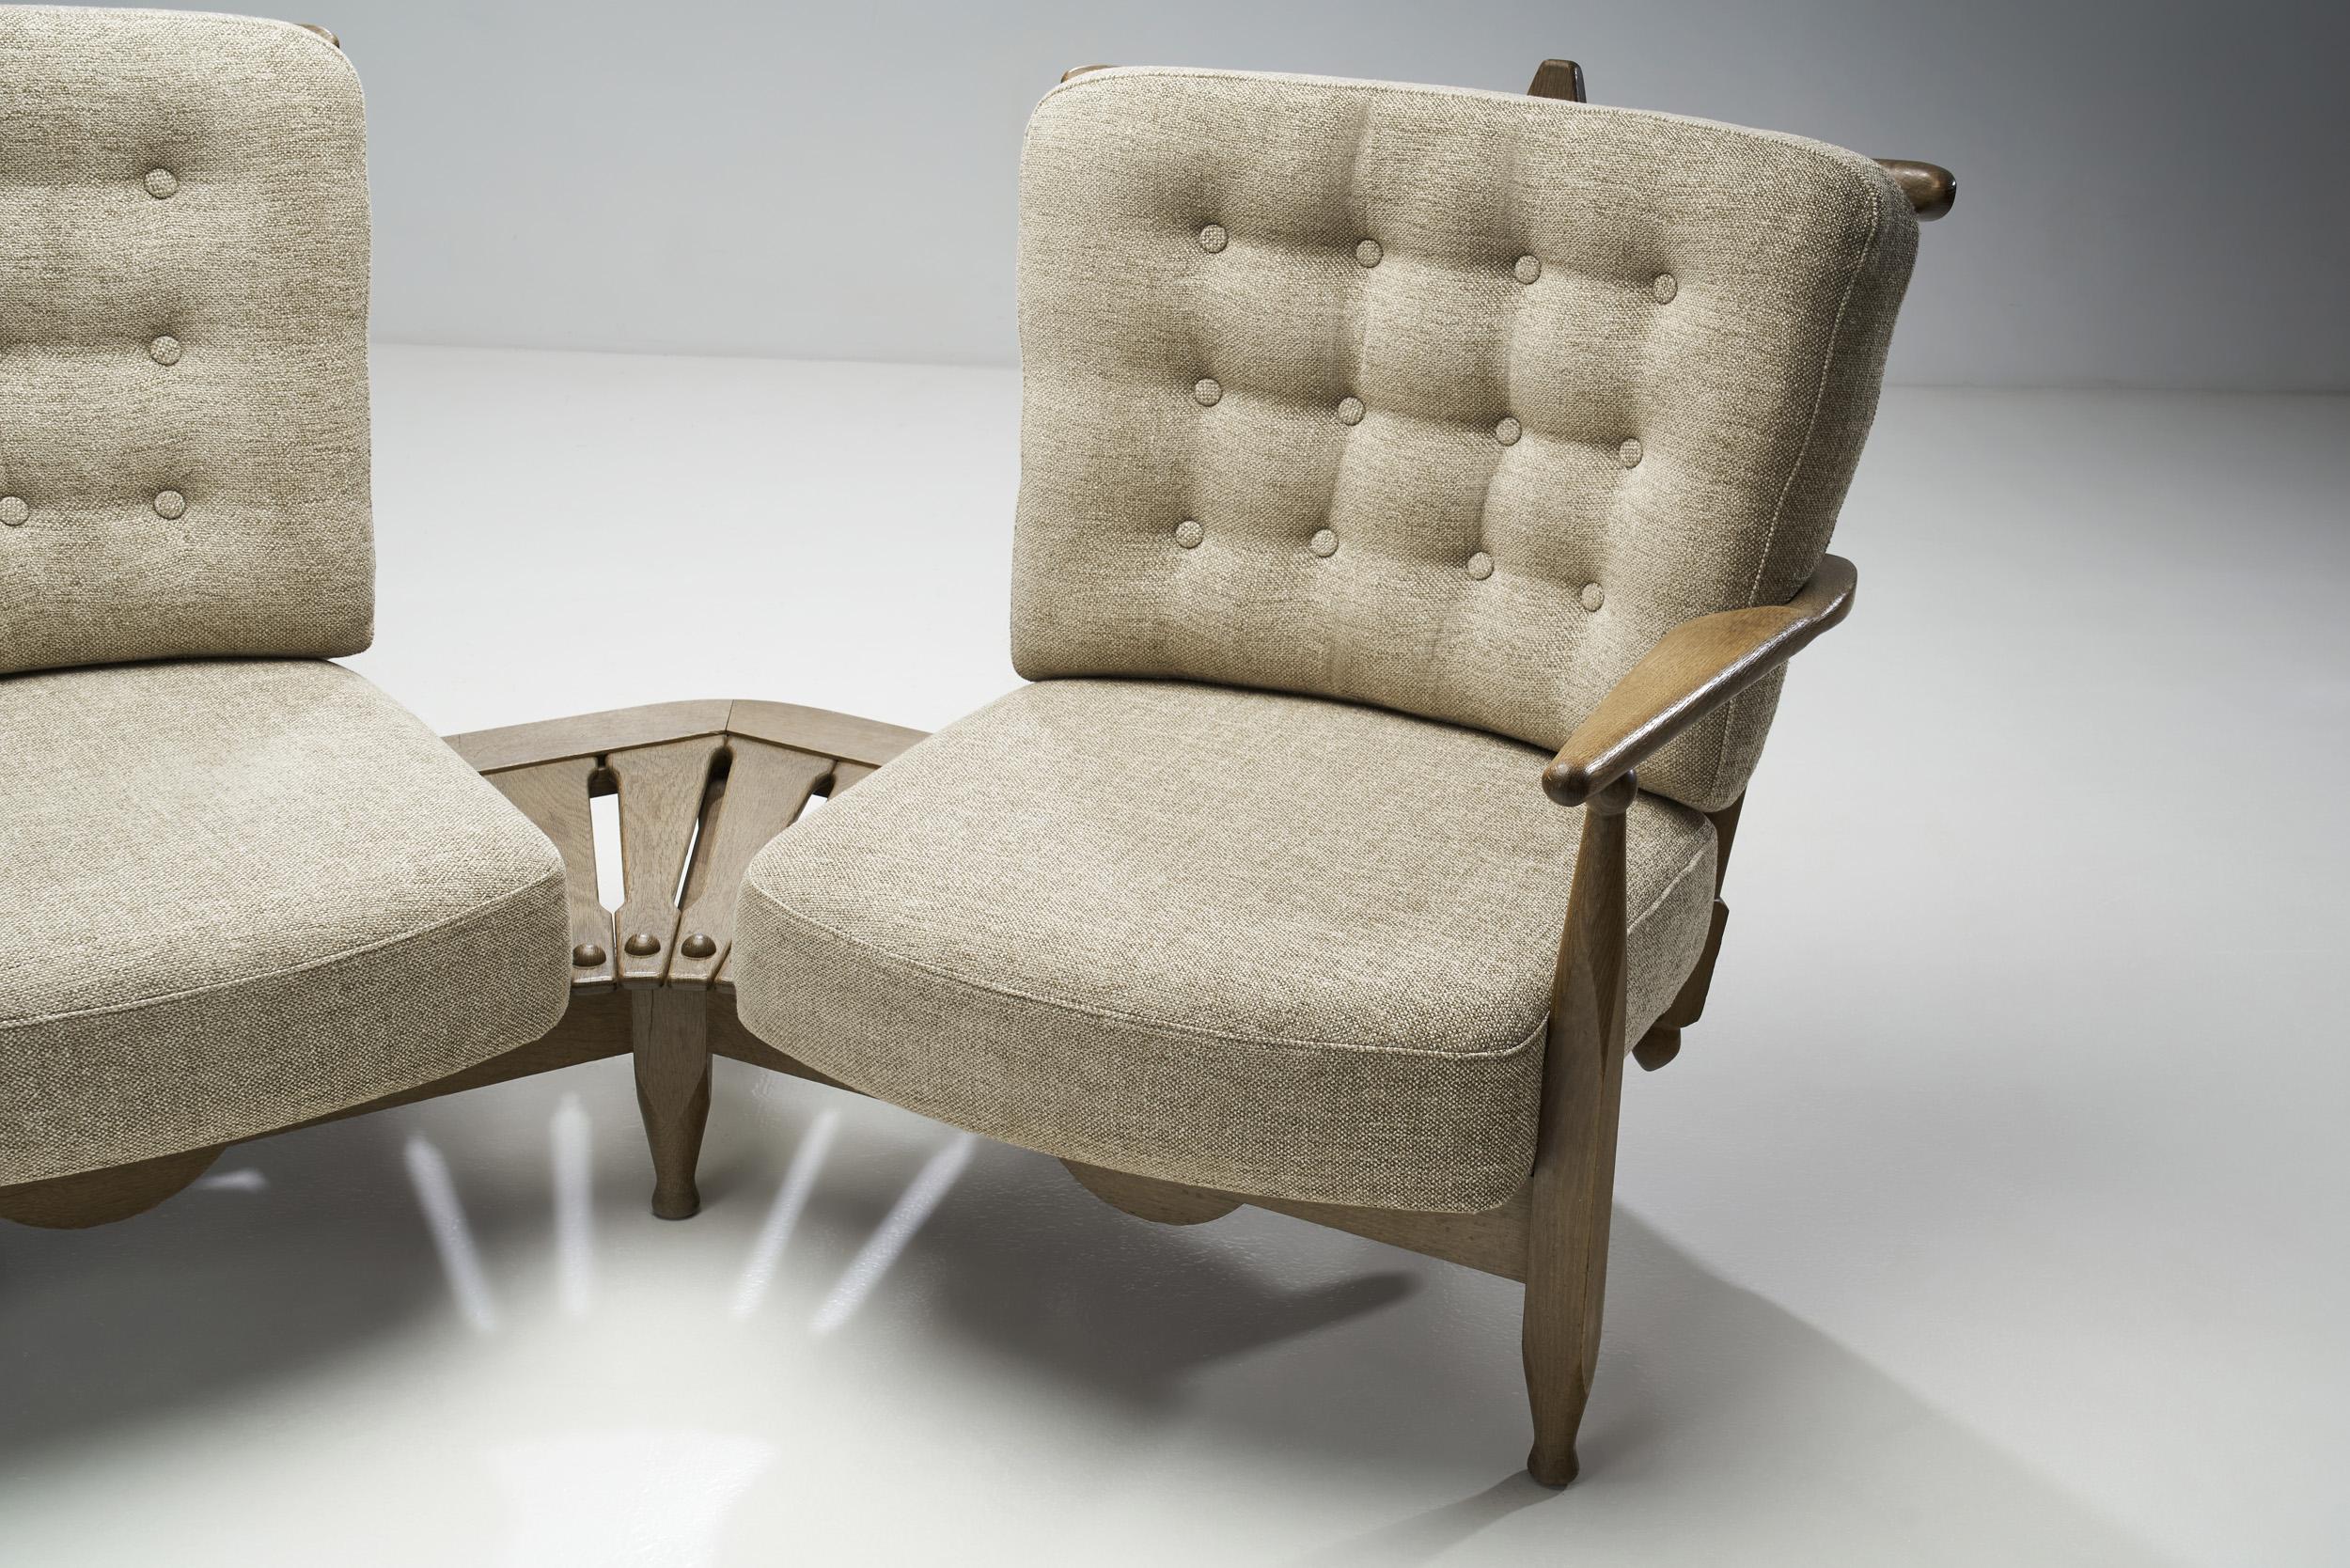 Mid-20th Century Guillerme et Chambron Two-Seater Settee for Votre Maison, France 1950s